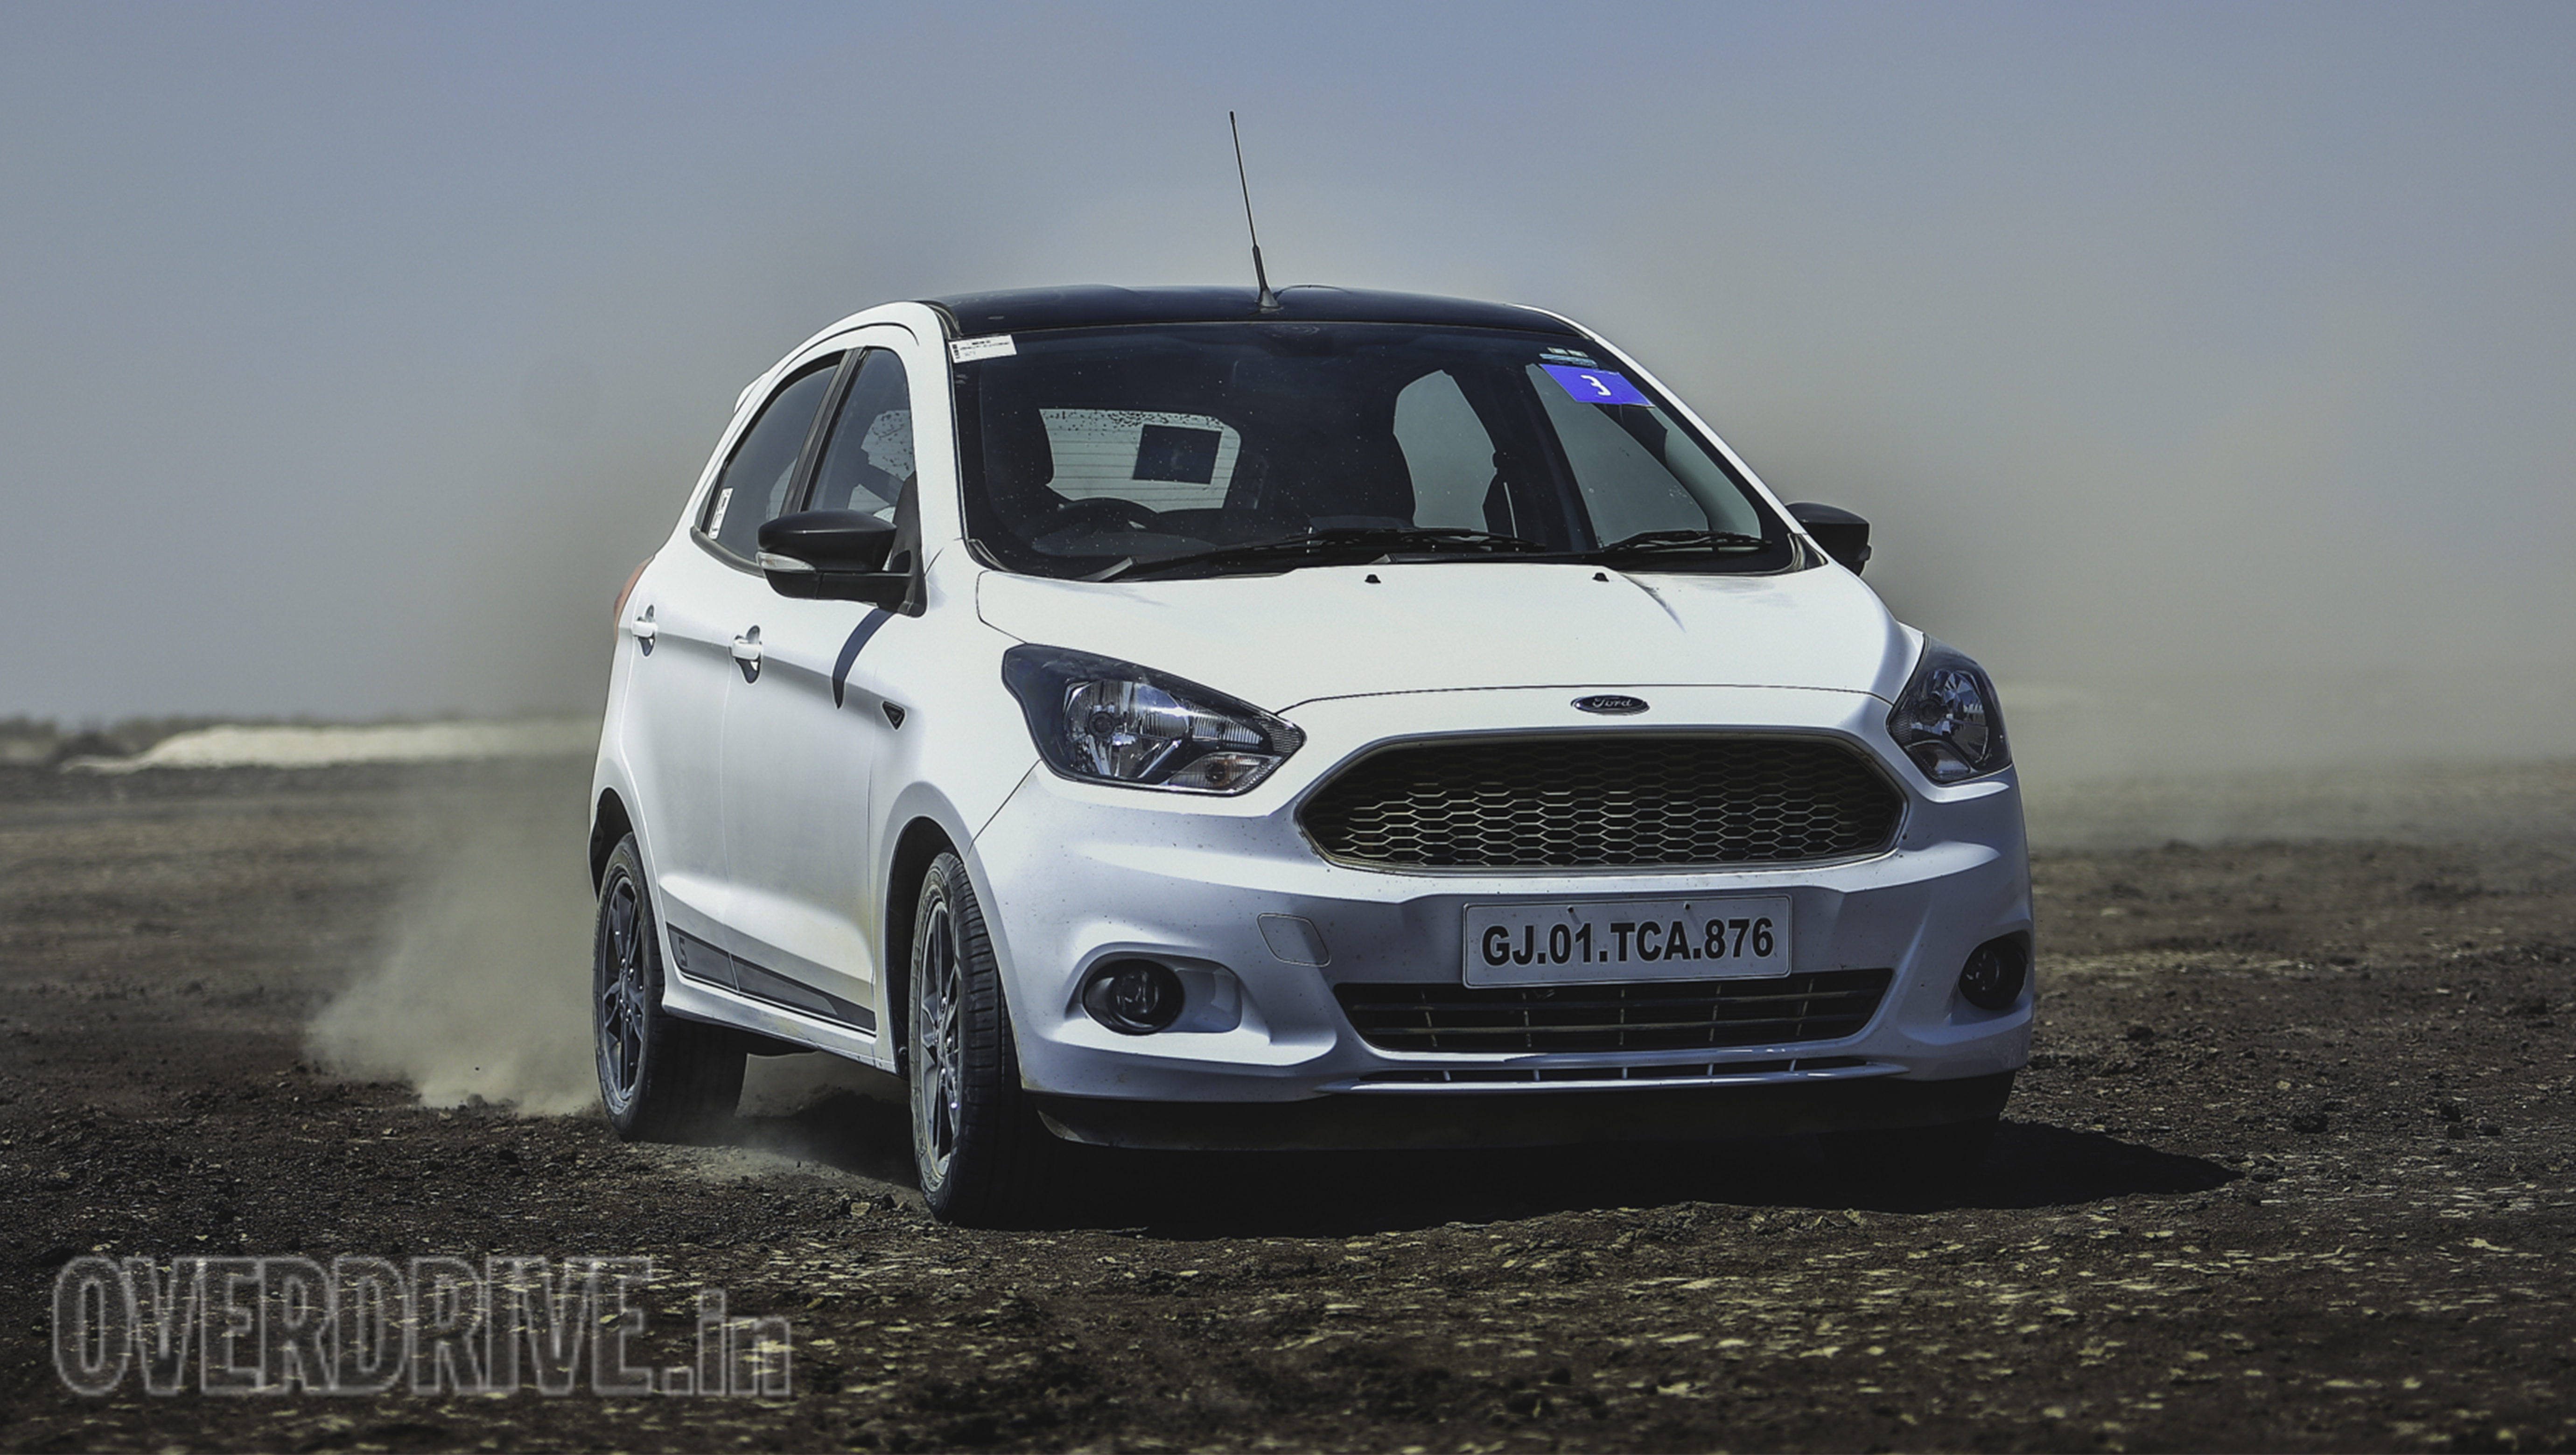 2017 Ford Figo Sports image gallery - Overdrive